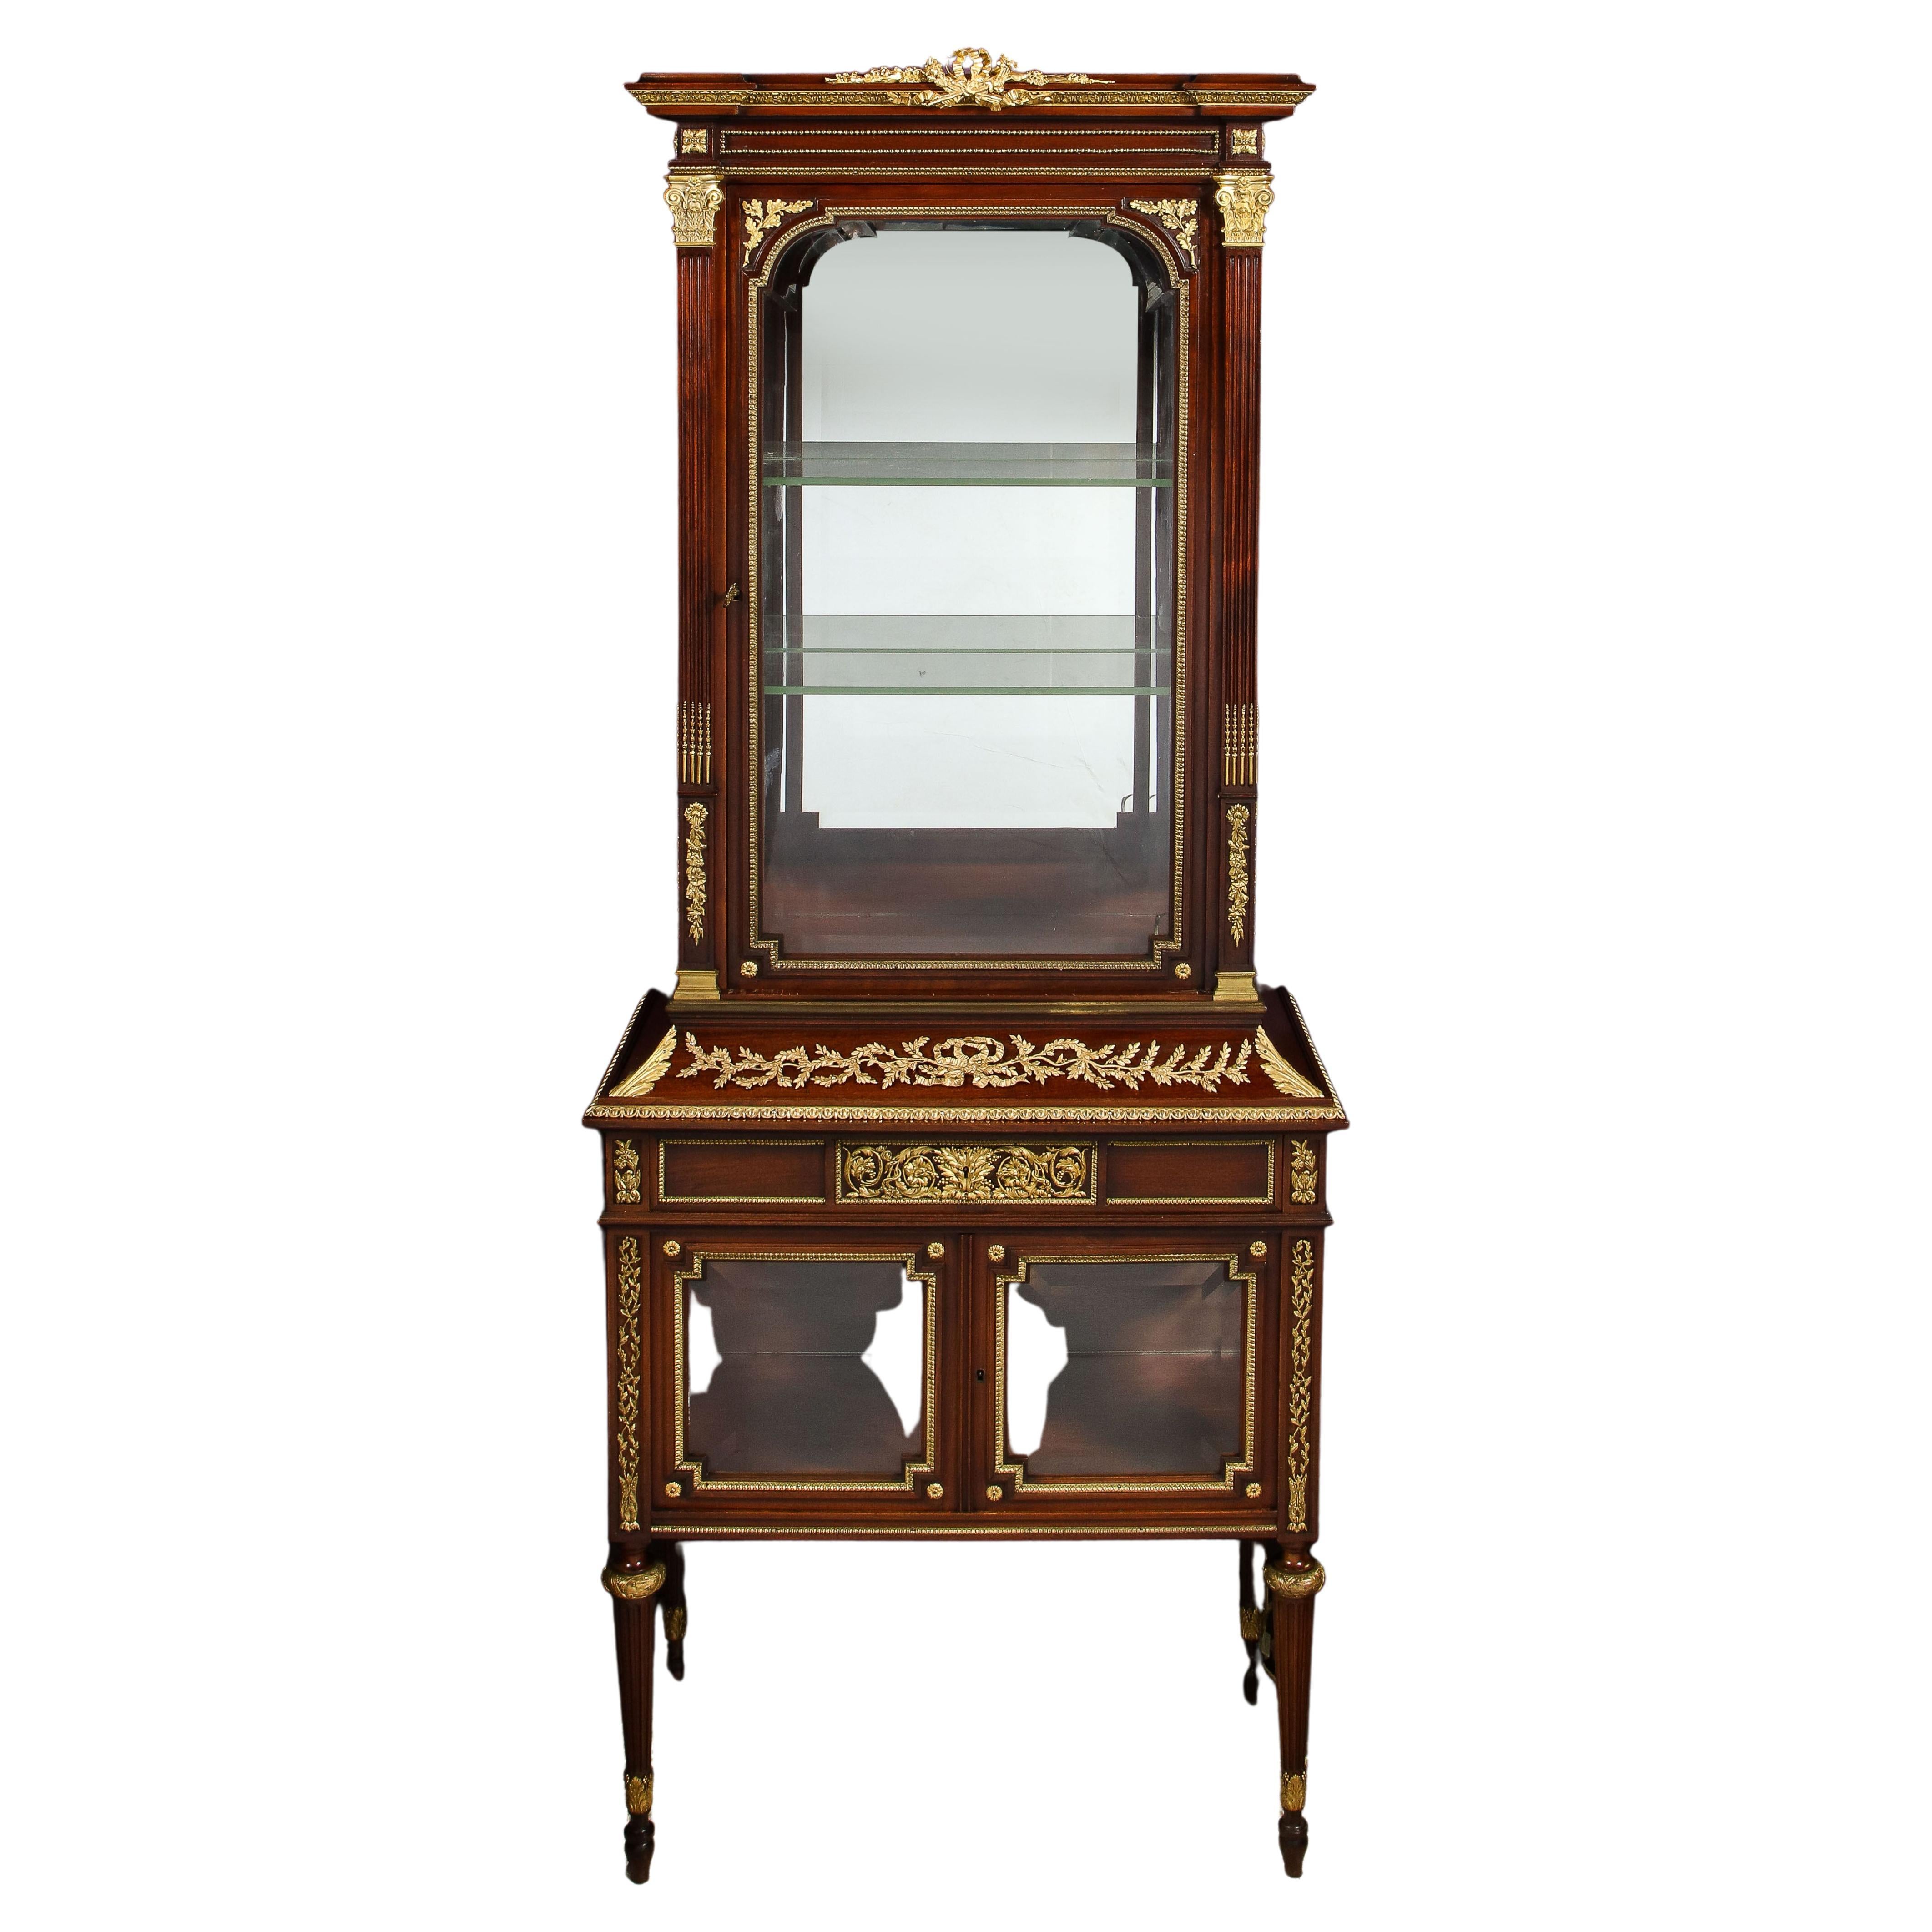 An exquisite French Ormolu-mounted mahogany and glass vitrine cabinet, attributed to Francois Linke, circa 1880.


Although unsigned, the jewel-like quality ormolu bronze mounts throughout, especially the corinthian columns, and the best mahogany